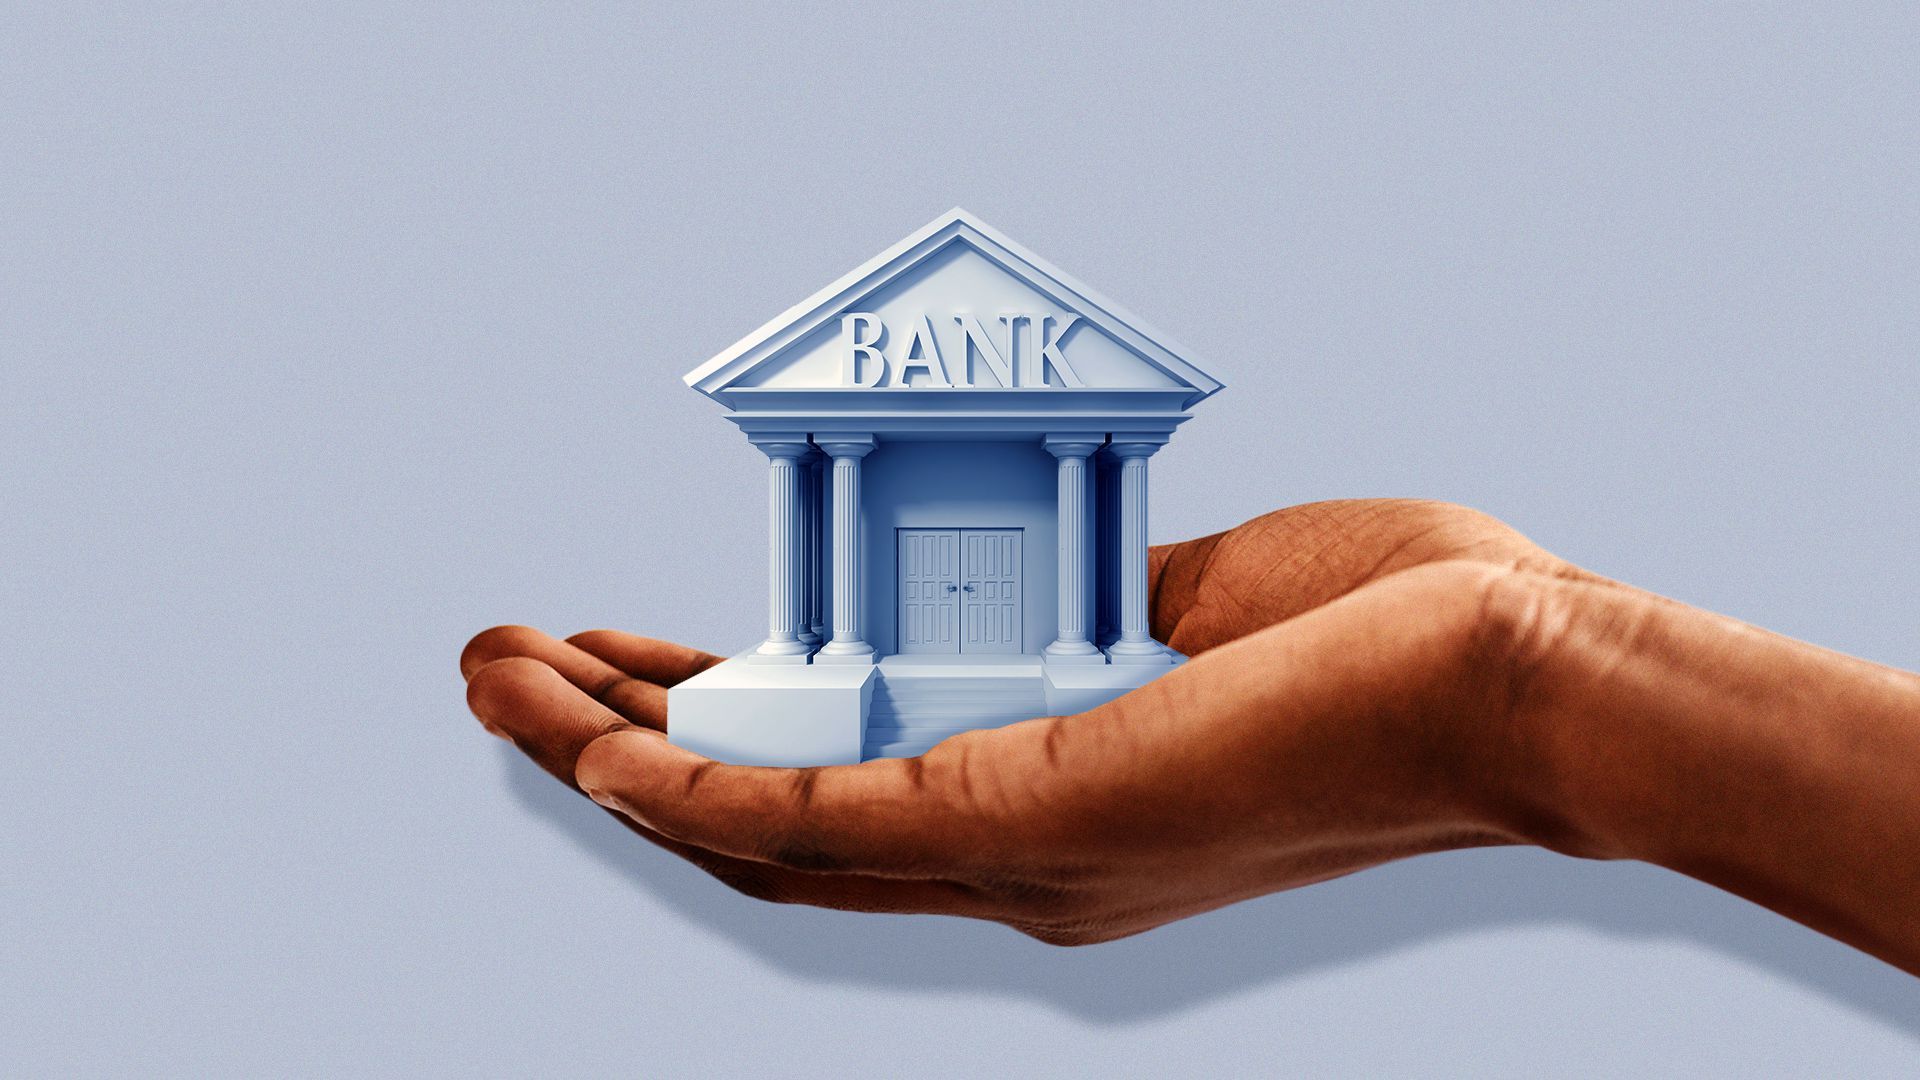 Illustration of a hand holding a bank building.